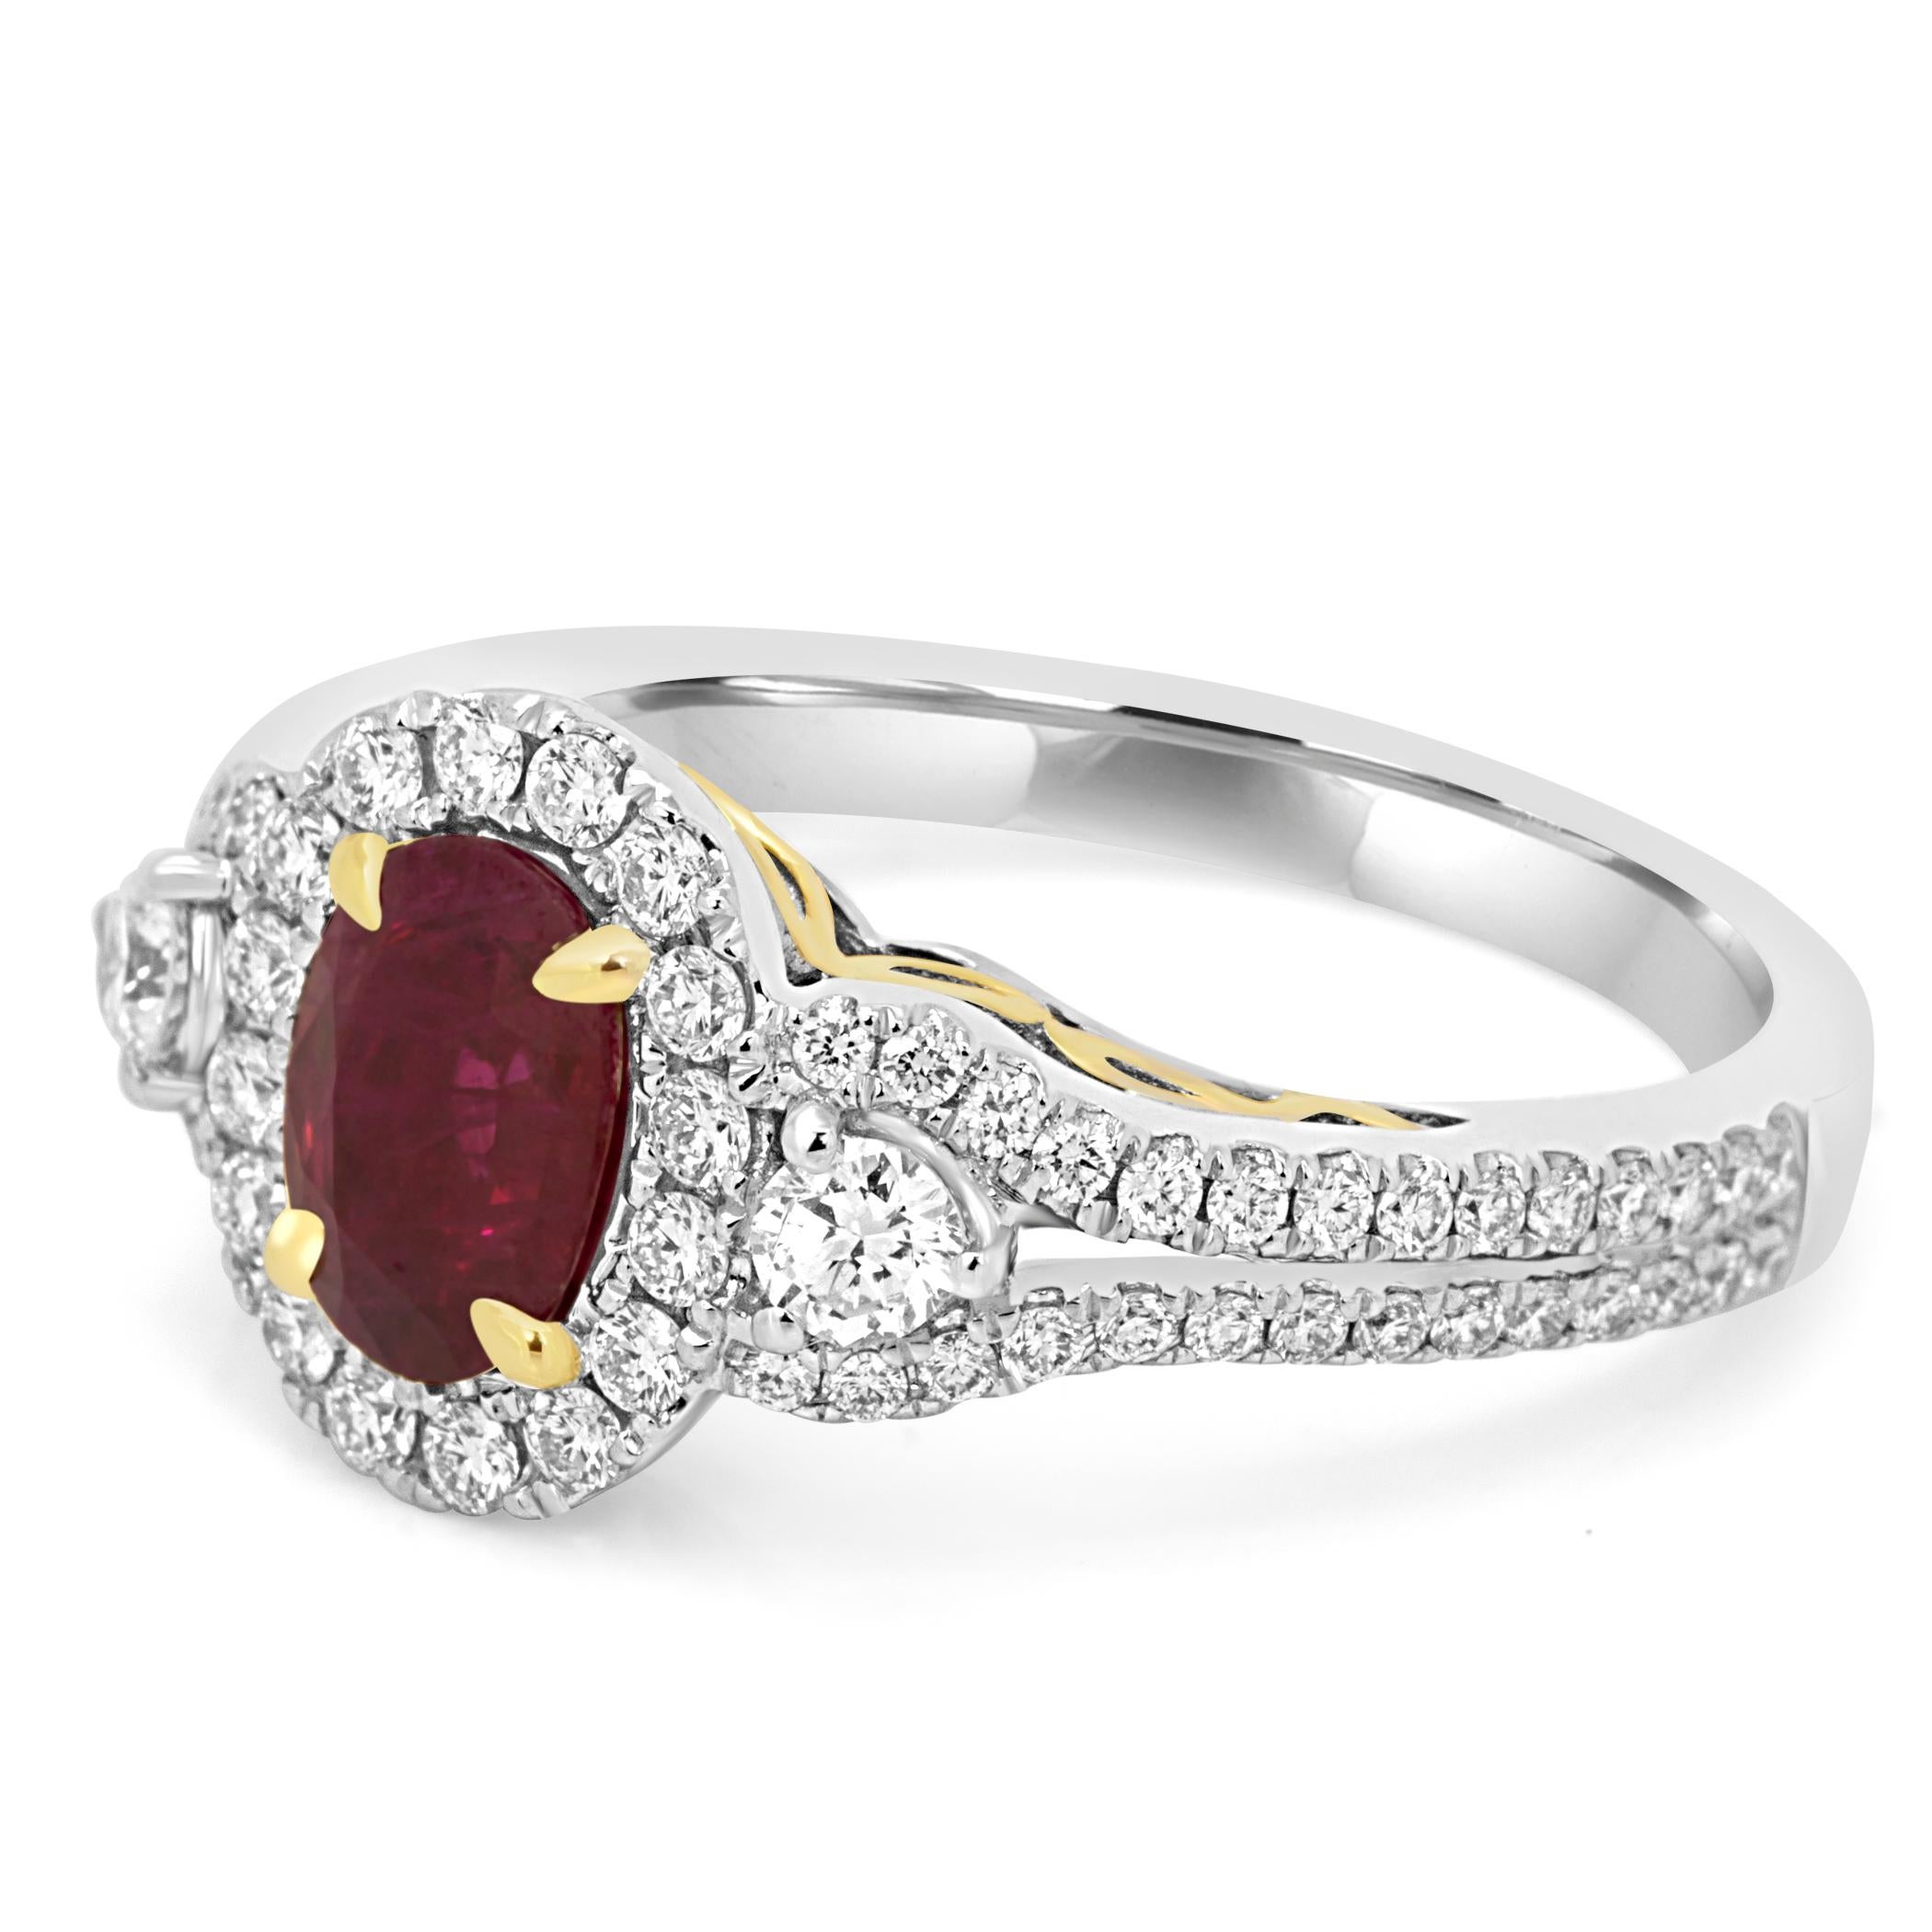 Stunning Ruby Oval 0.80 Carat Encircled in a Single Halo of White Round Diamonds 0.48 Carats Flanked with 2 White Round Diamonds 0.16 Carat in 14K White and Yellow Gold Bridal and Cocktail Three Stone Ring.

Style available in different price